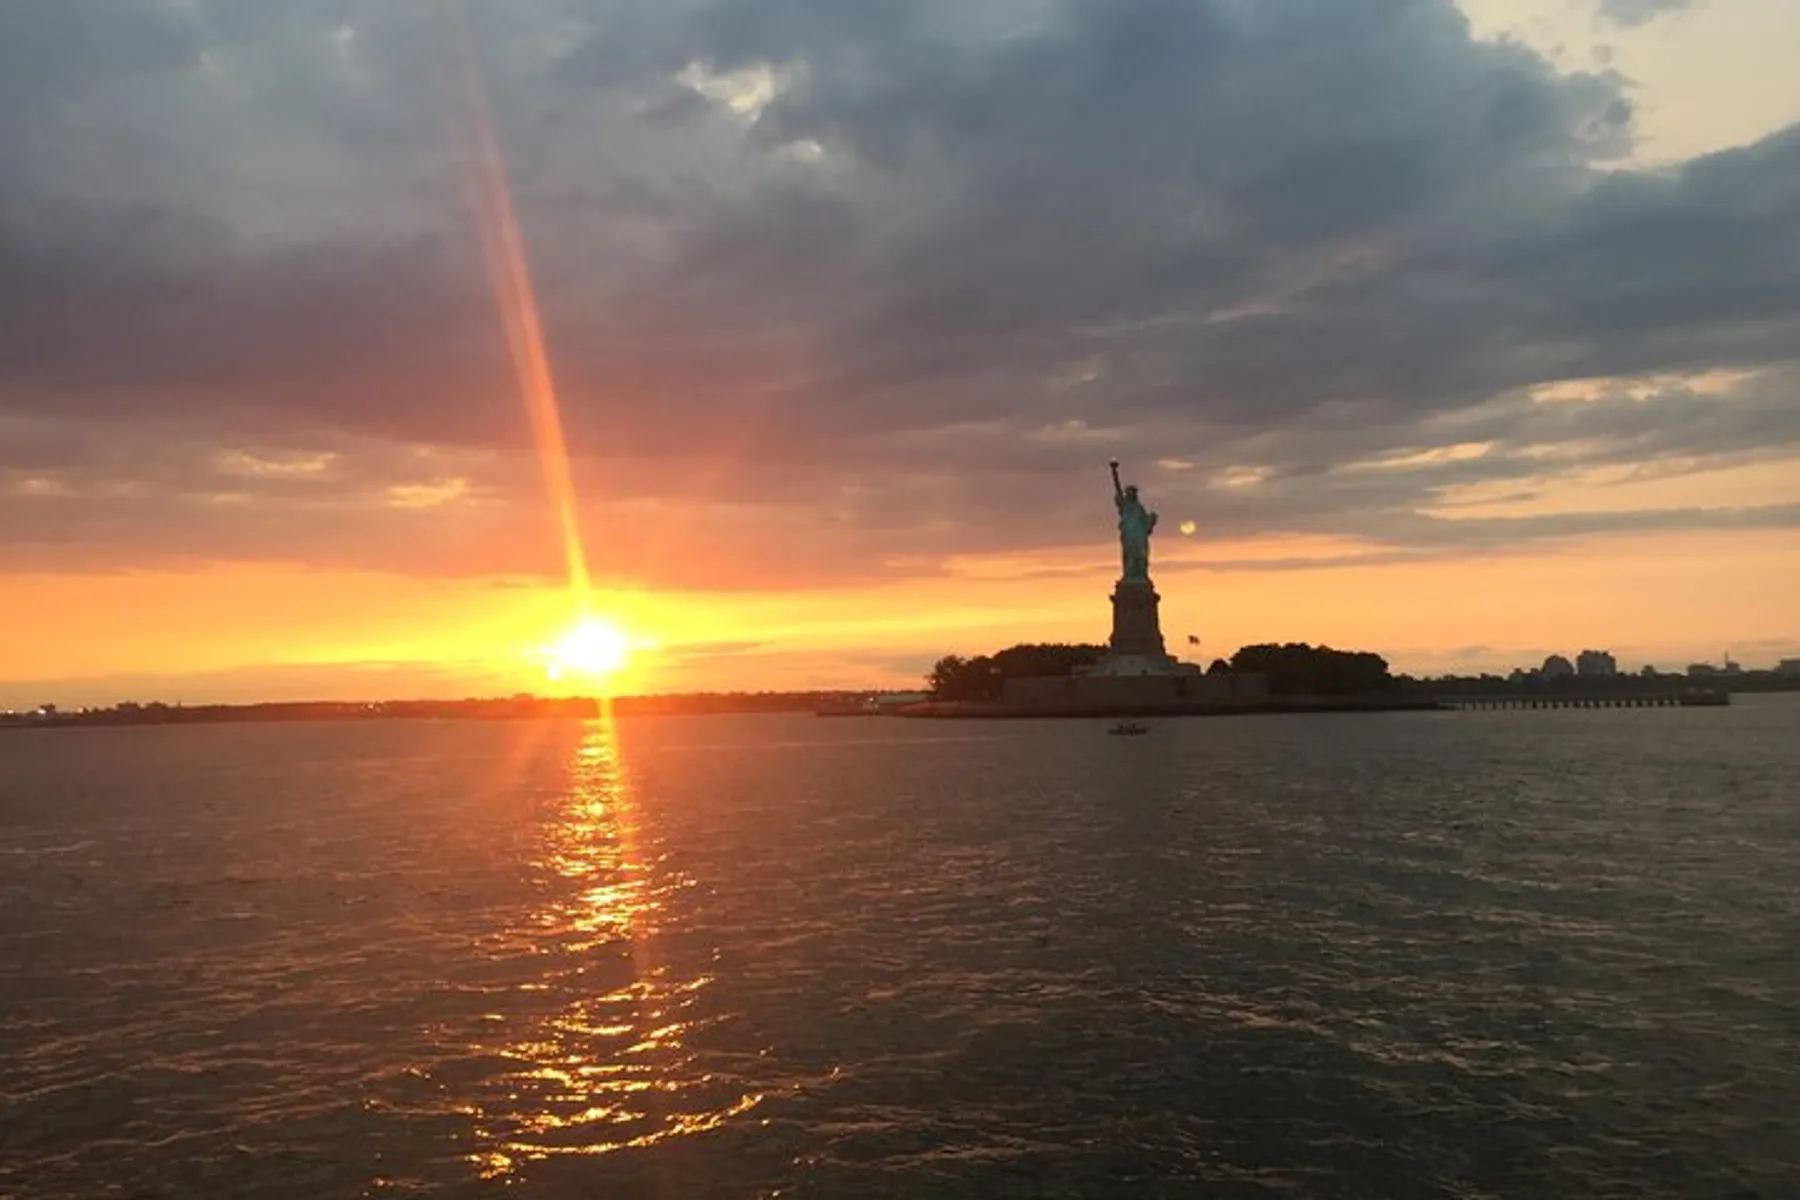 The sun sets beautifully behind the Statue of Liberty, casting a warm glow over the water.